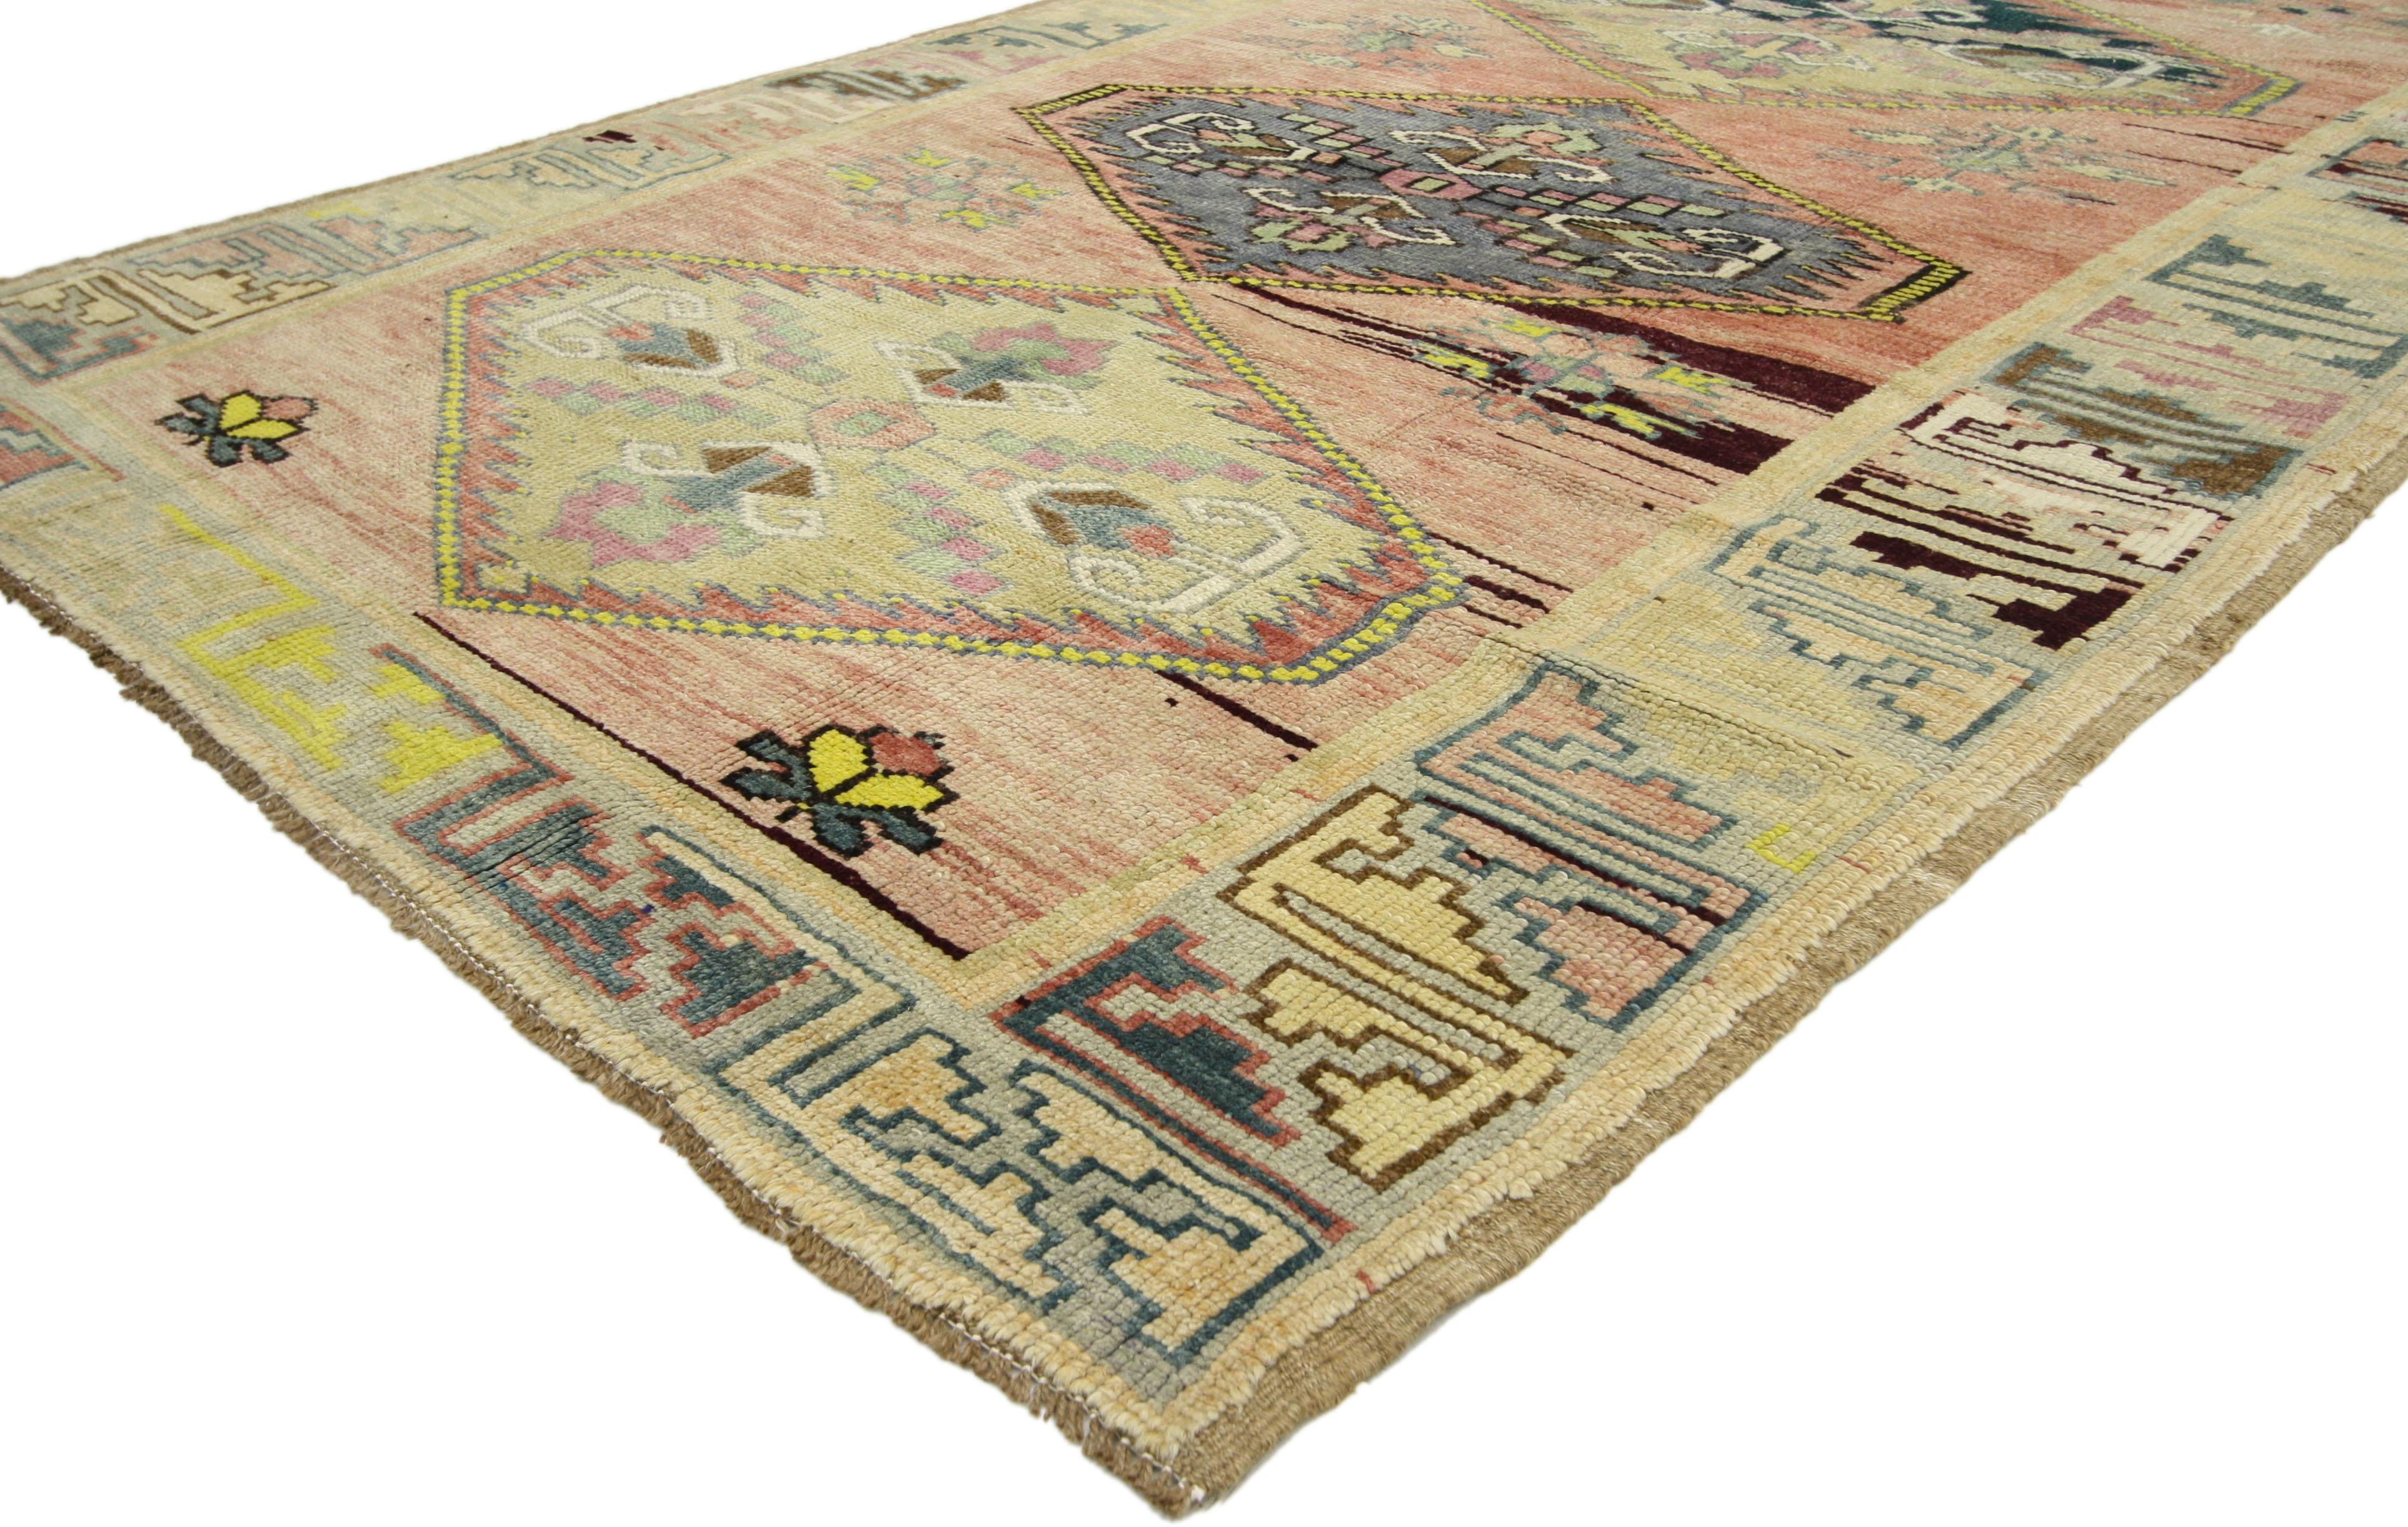 52414 vintage Turkish Oushak gallery rug, wide hallway runner. This hand knotted wool antique-washed vintage Turkish Oushak rug features five large hexagonal medallions spread across an abrashed field. Each medallion contains four stylized palmettes